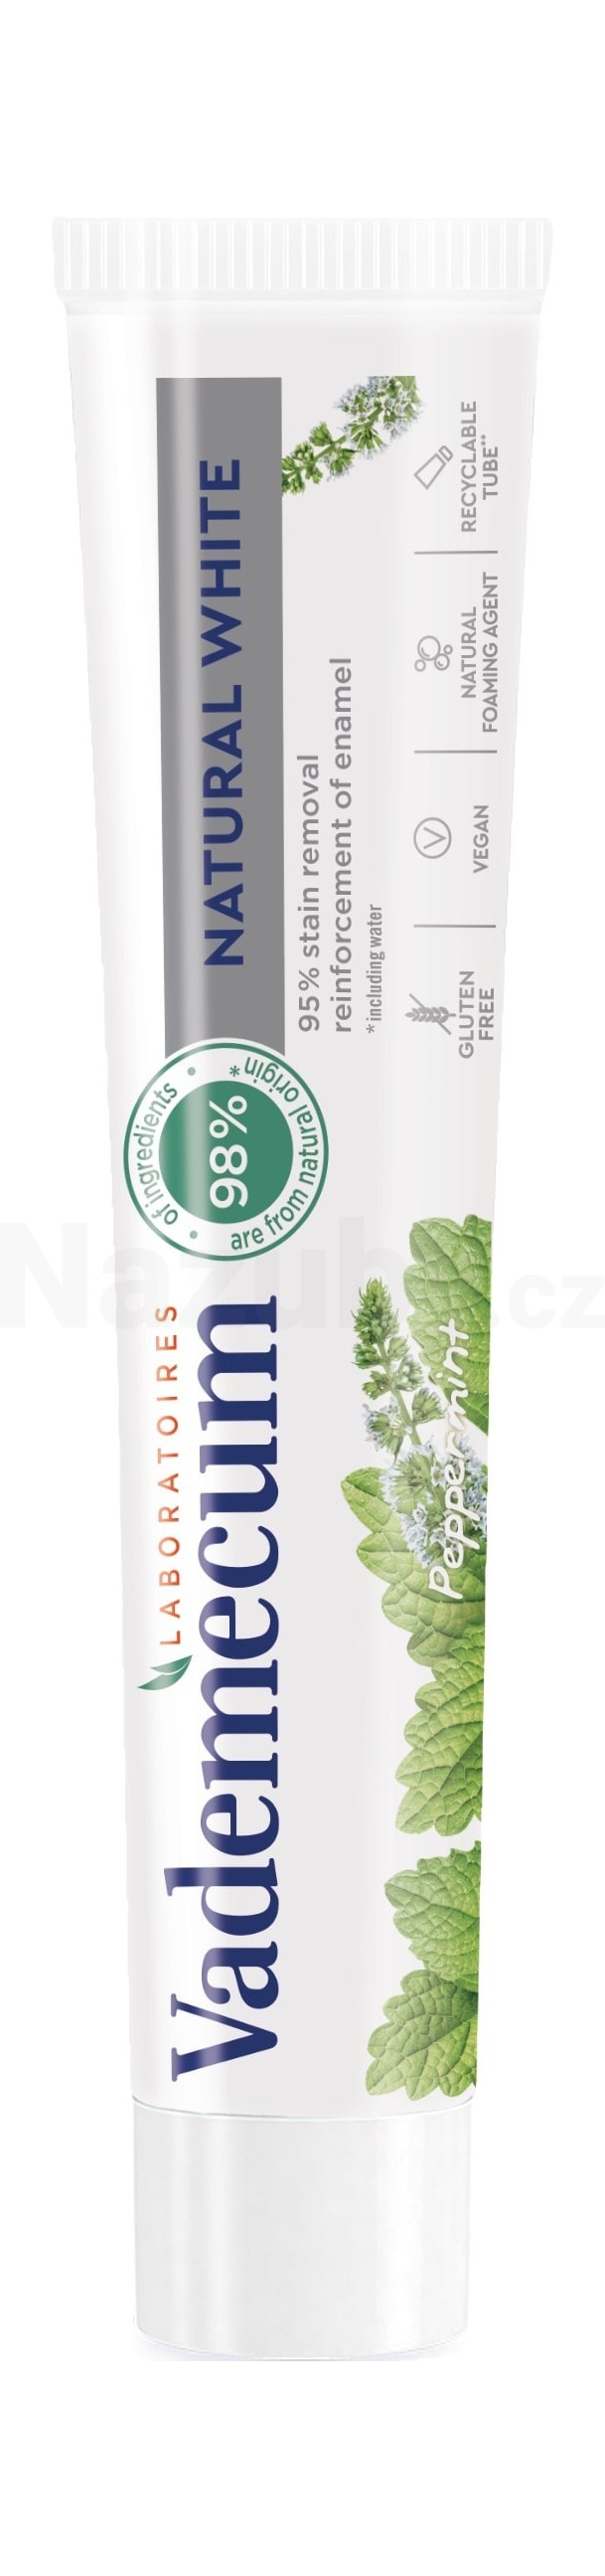 Vademecum Natural White Peppermint zubní pasta 75 ml